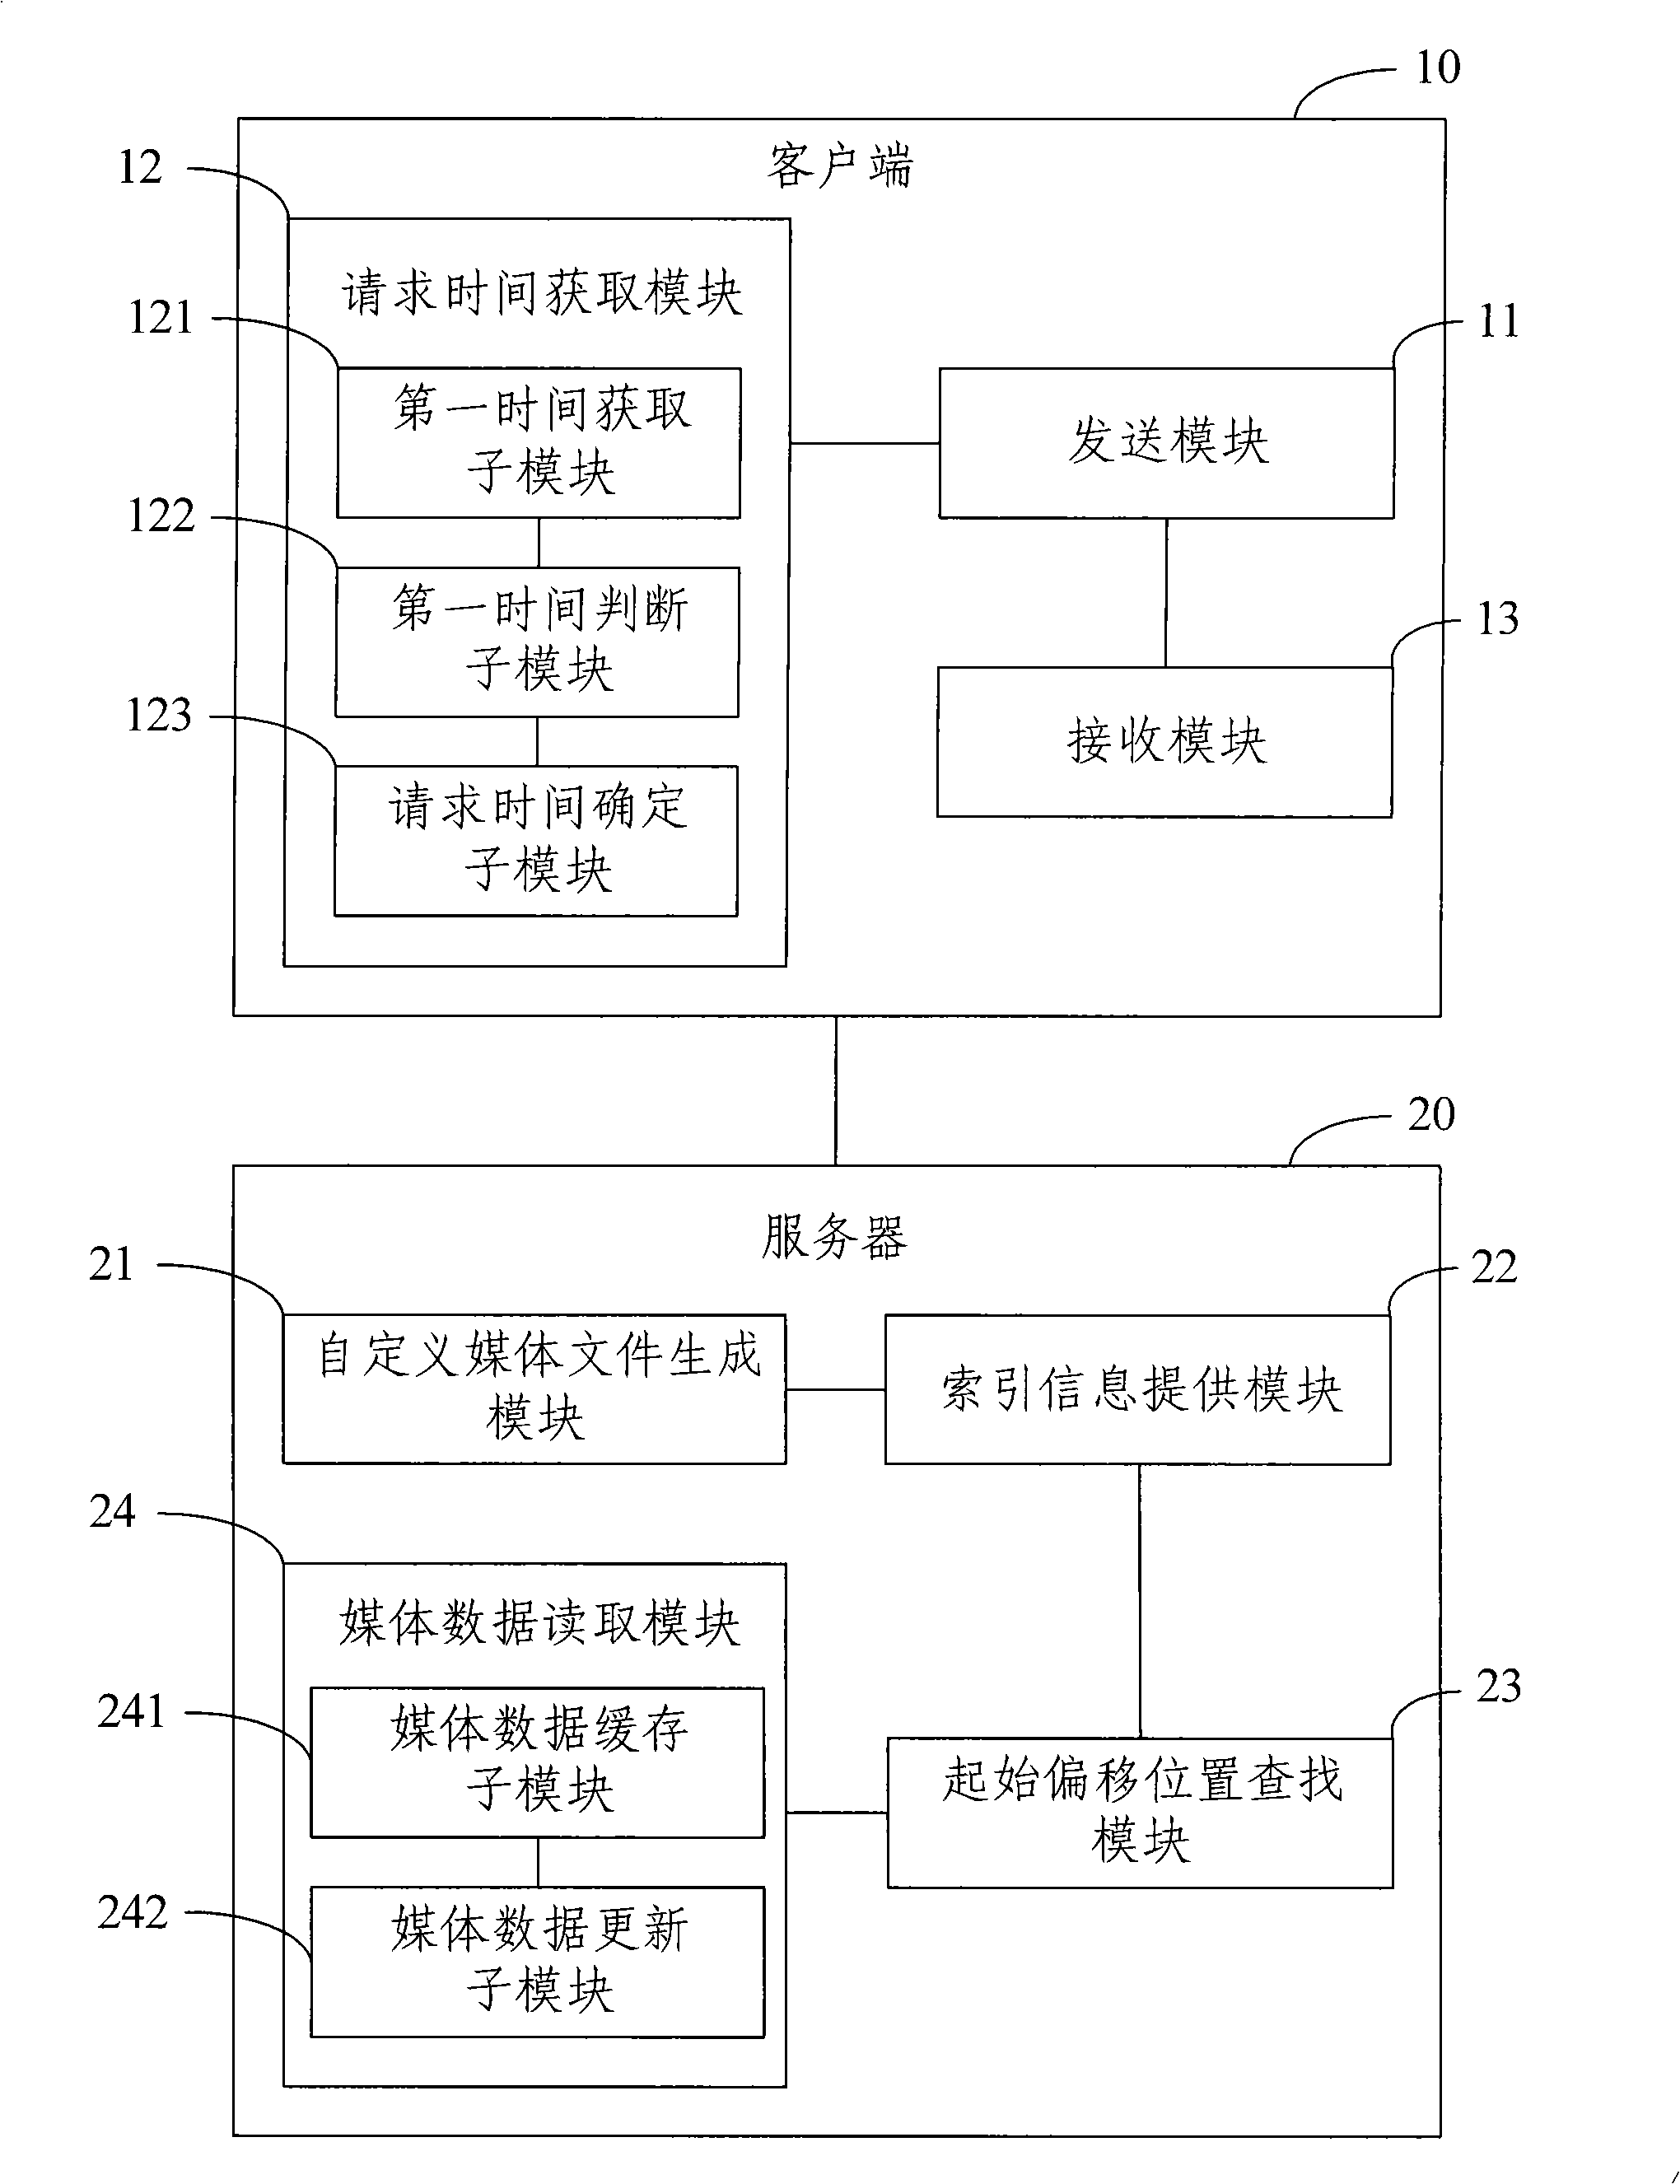 Demand method, system and device of media file